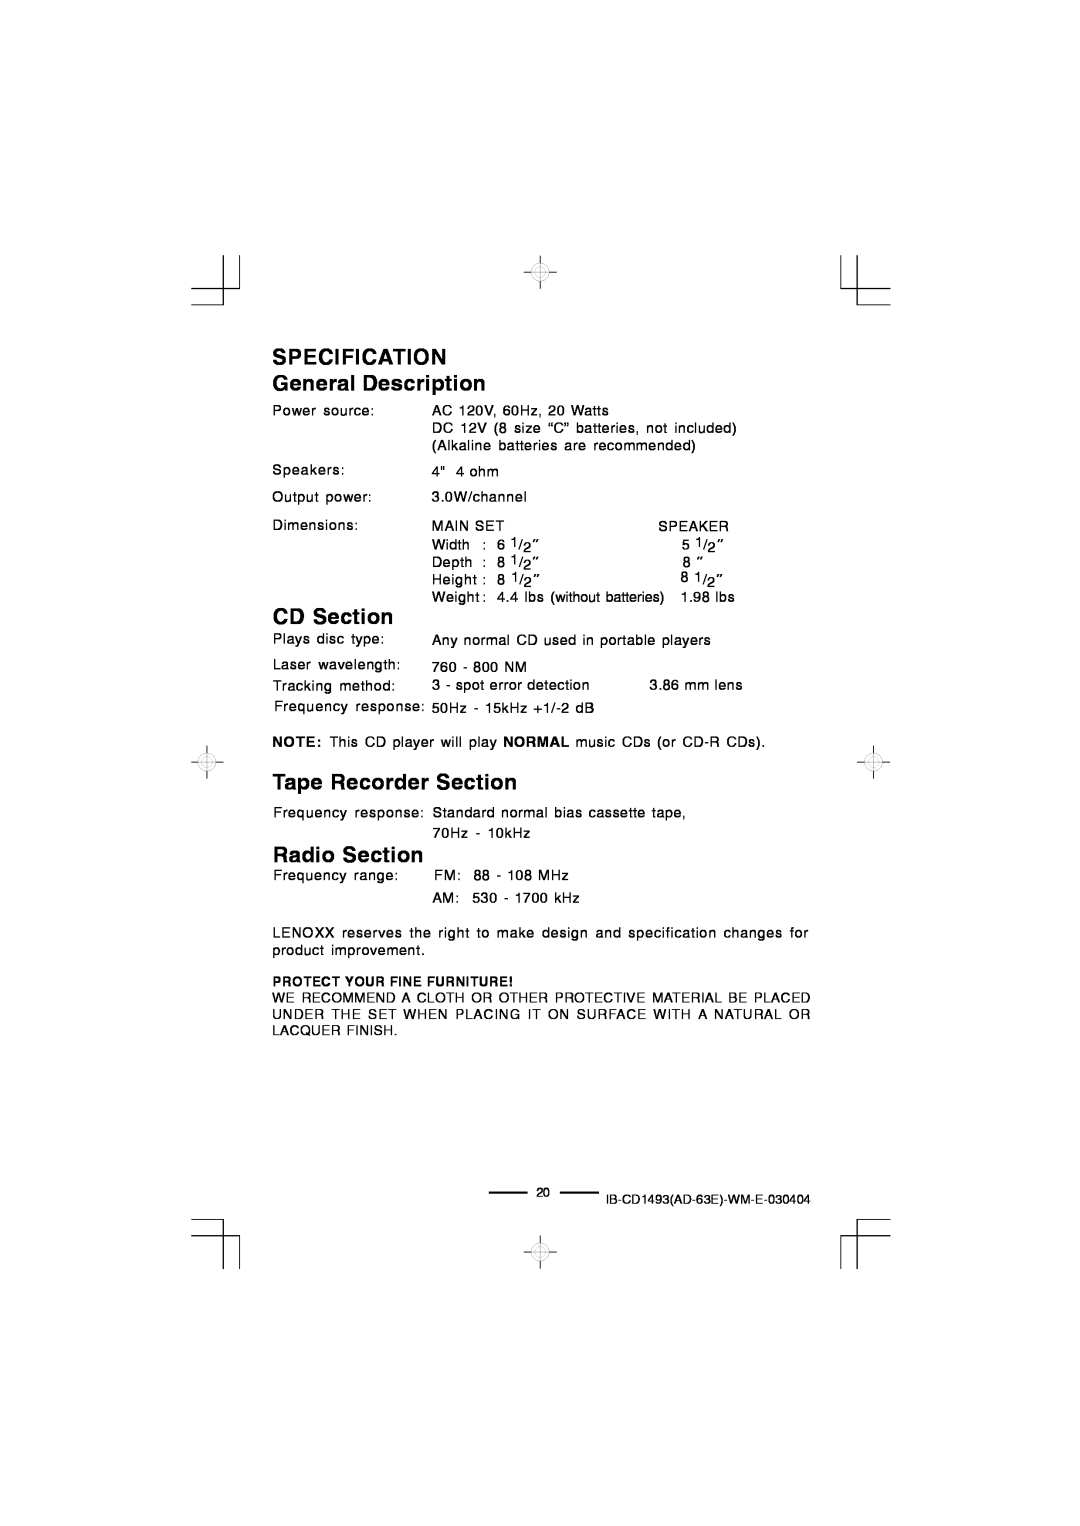 Lenoxx Electronics CD-1493 manual SPECIFICATION General Description, CD Section, Tape Recorder Section, Radio Section 